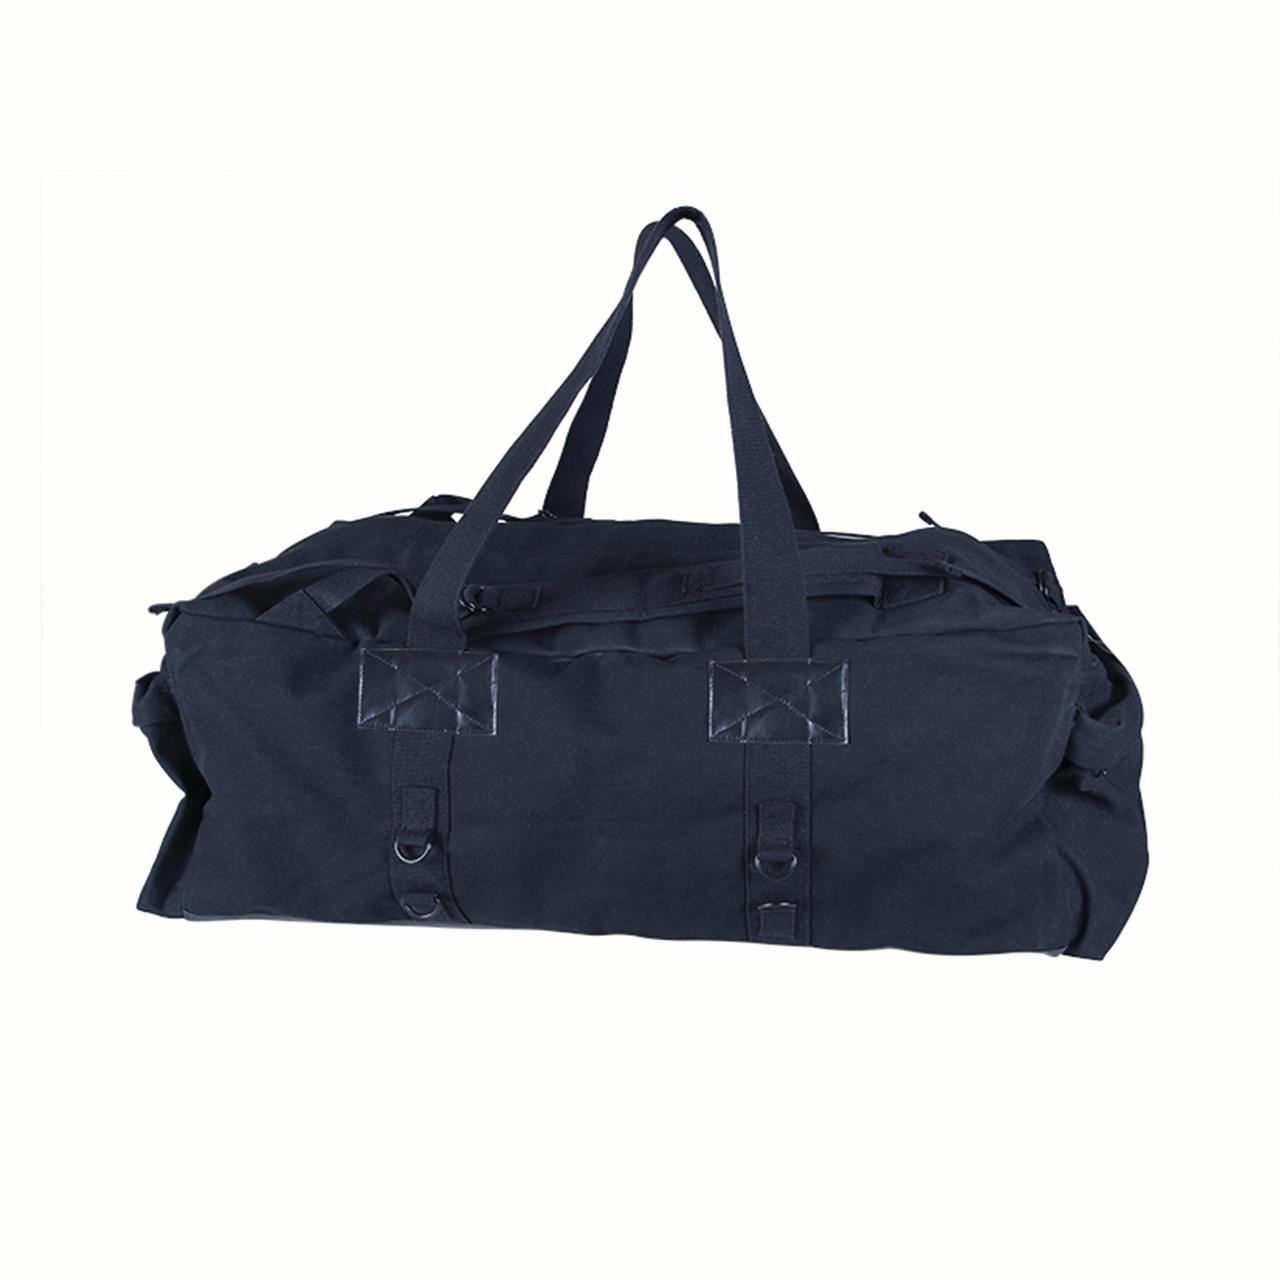 Stansport Tactical Black Canvas Duffle Bag - www.waterandnature.org - www.waterandnature.org